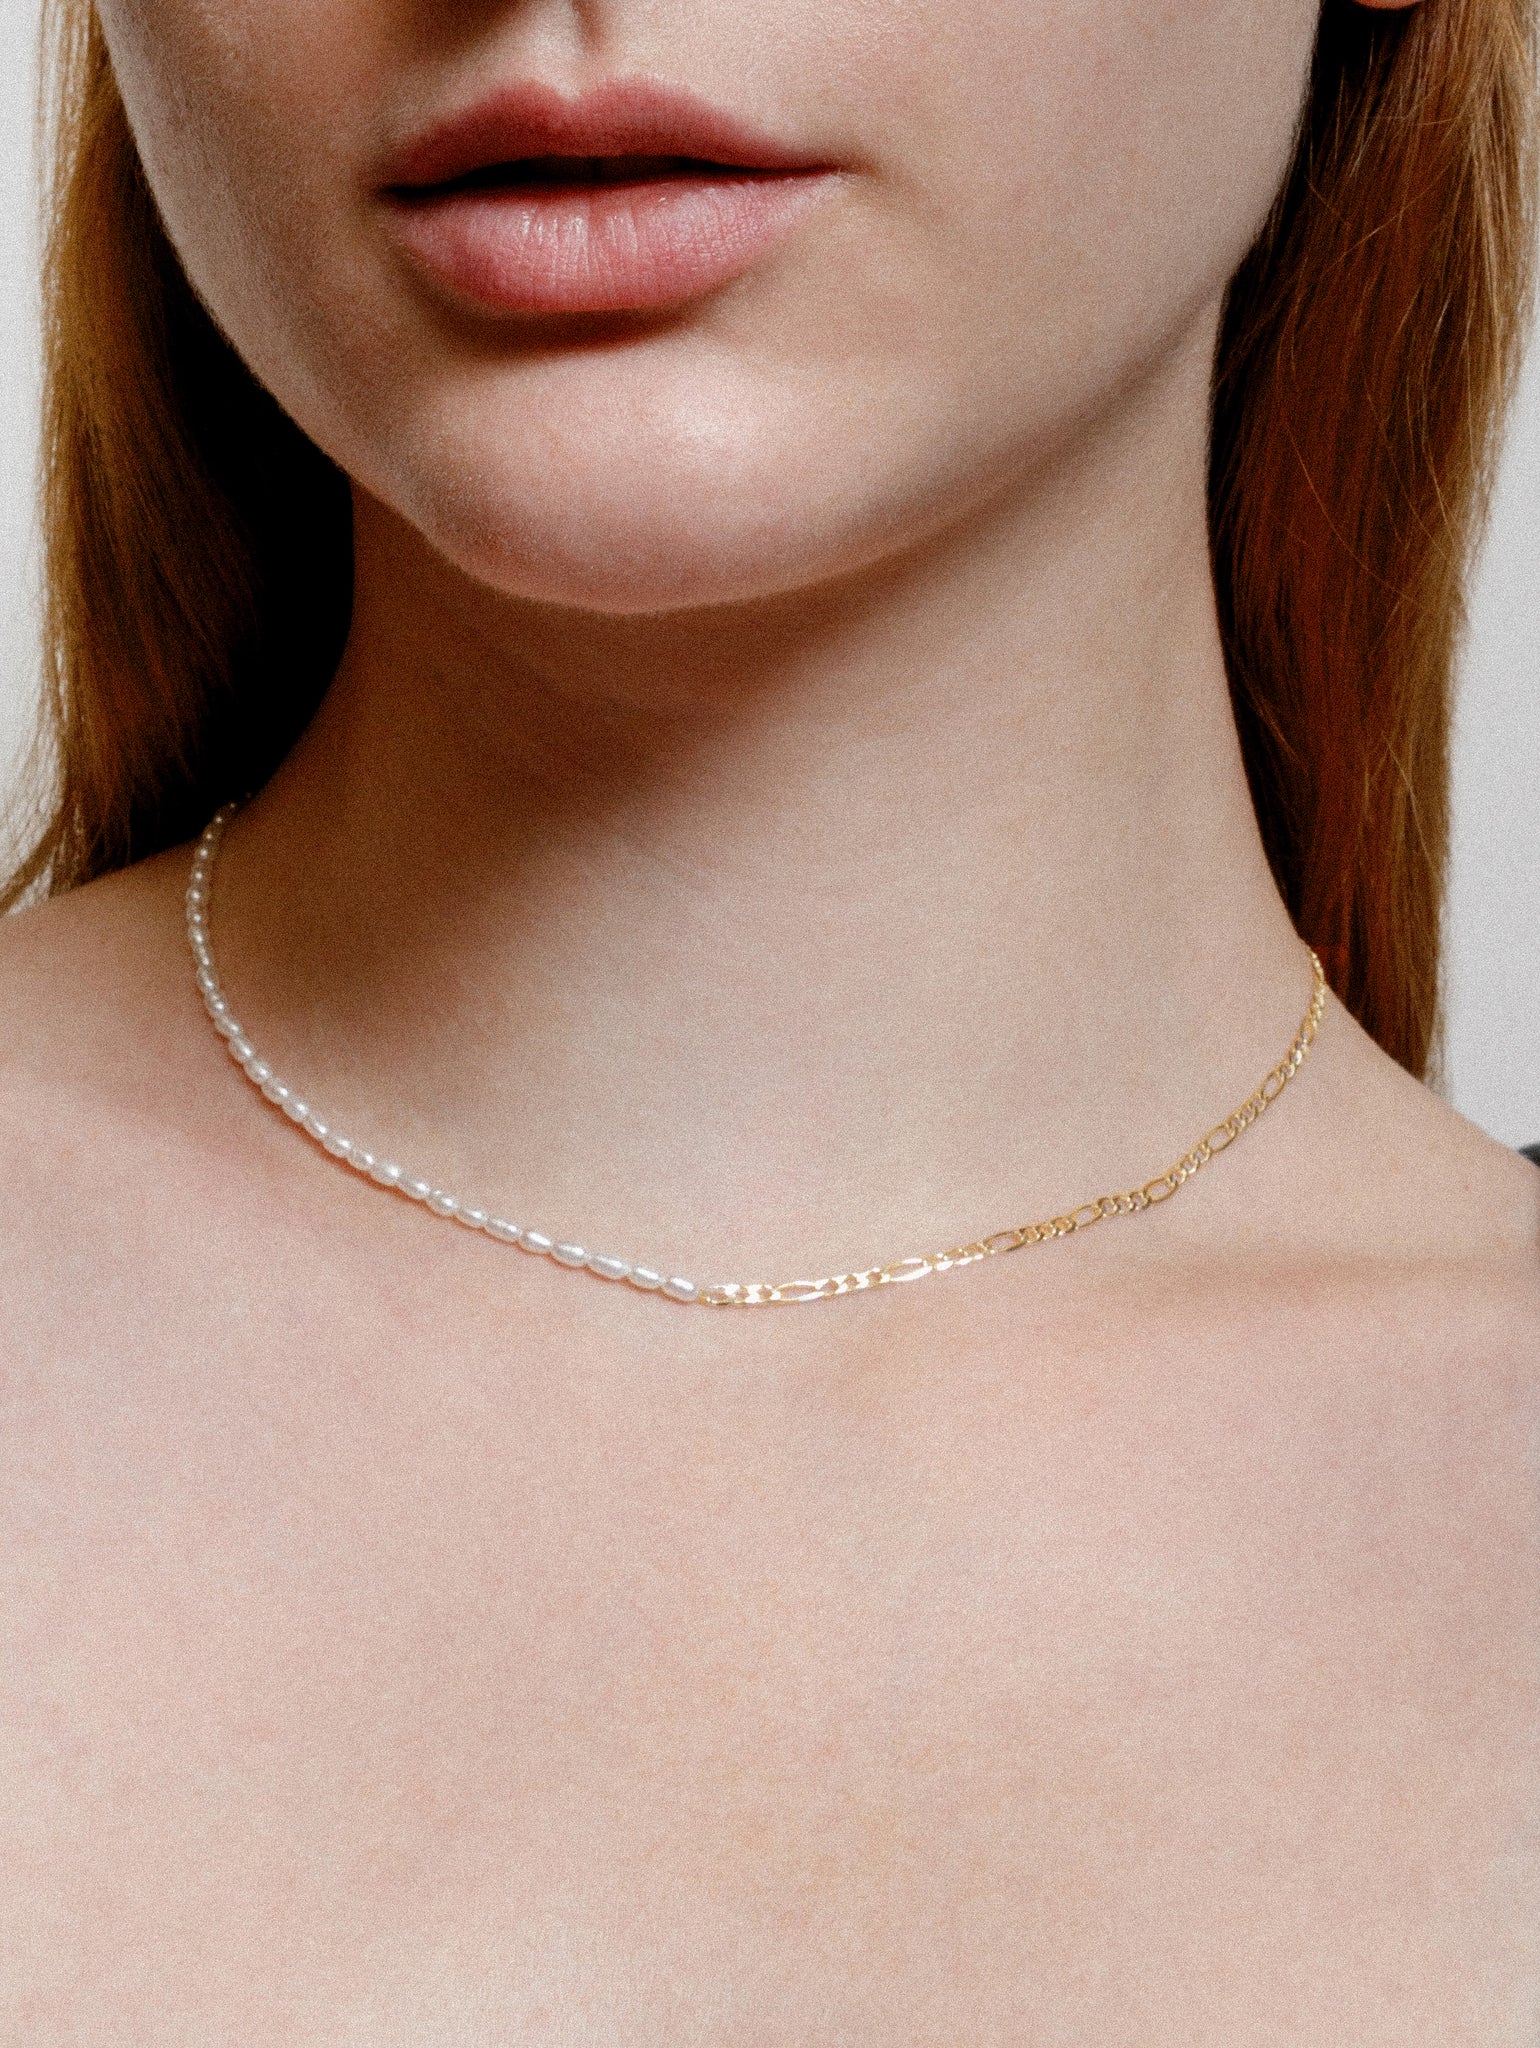 Wolf-Circus-Miniature-Pearl-Figaro-Chain-Combination-Necklace-14k-Gold-Plated-Mara-Necklace-in-Gold-Necklaces-Jewelry